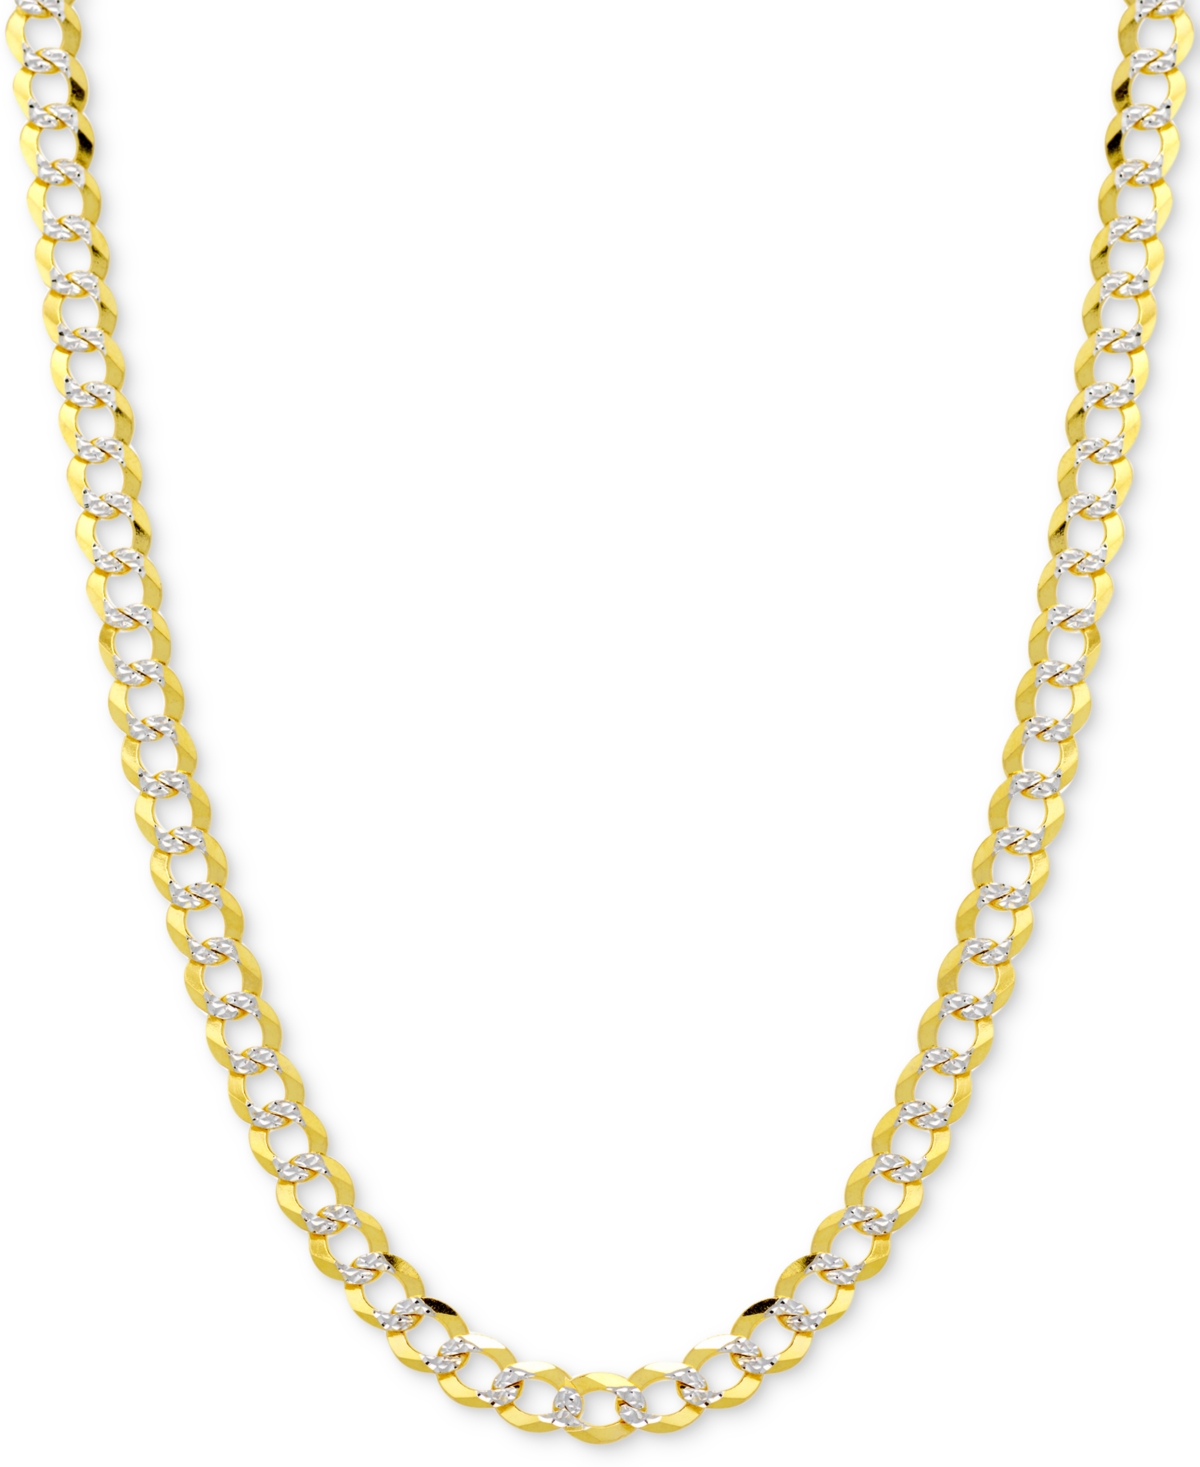 Italian Gold 26" Two-Tone Open Curb Chain Necklace in Solid 14k Gold & White Gold